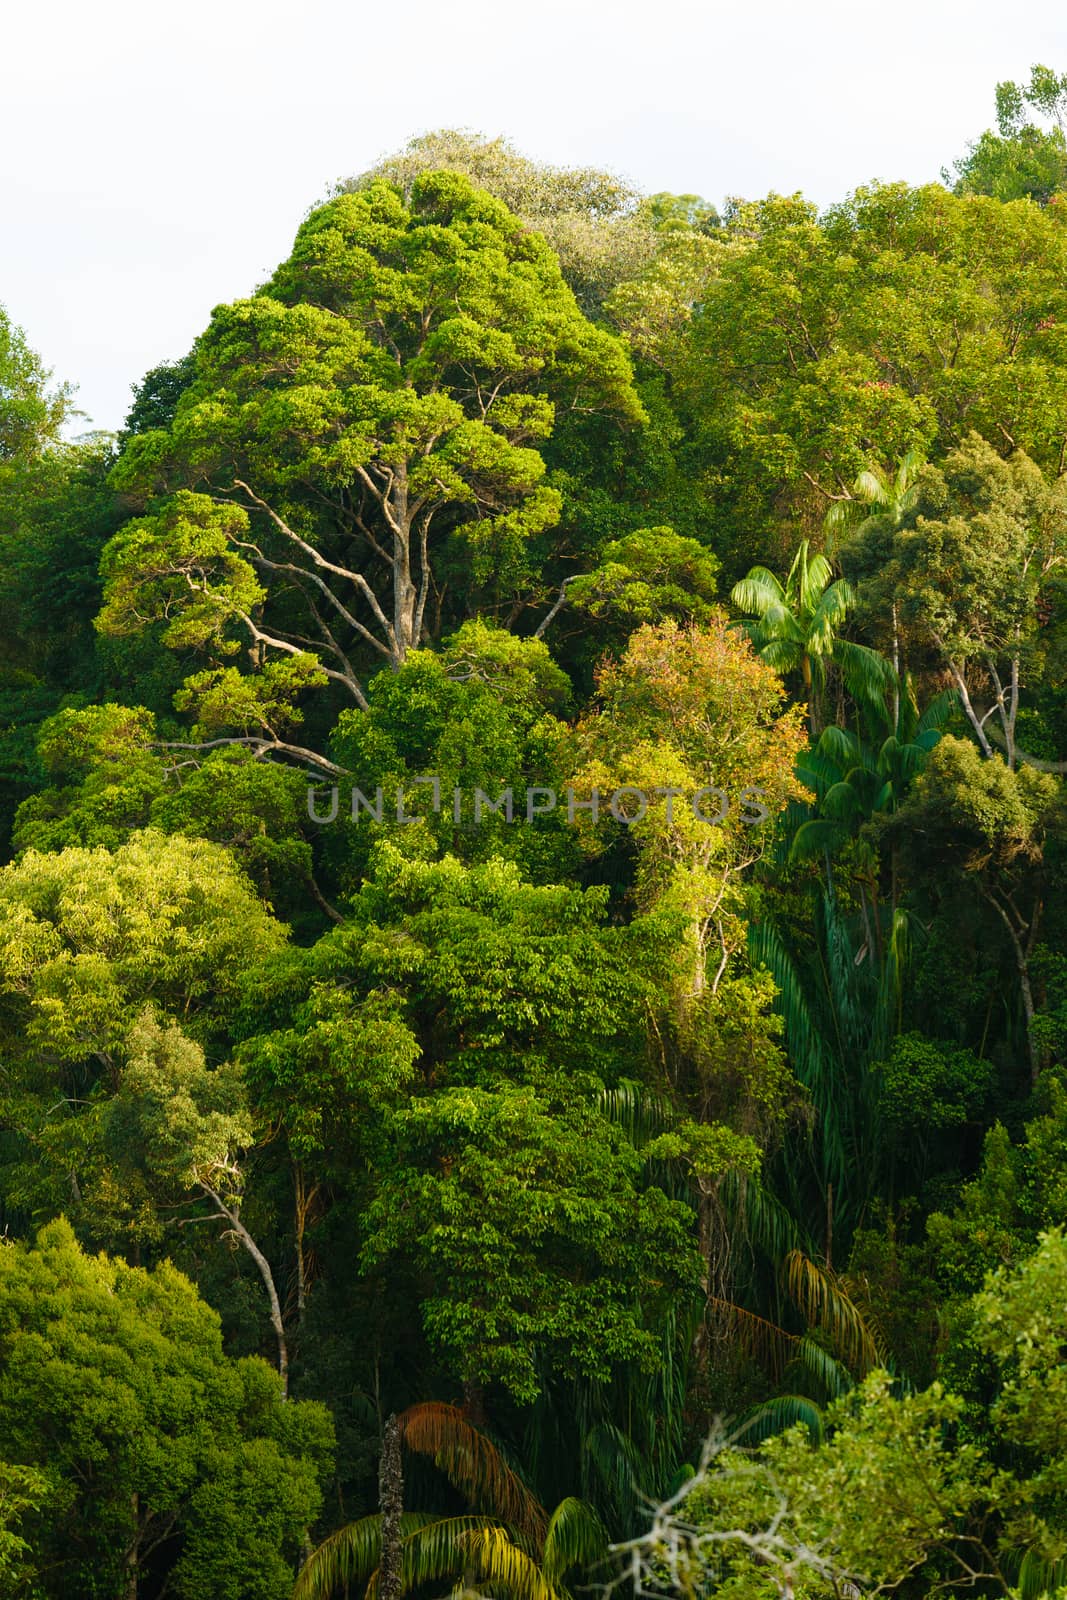 View of rainforest canopy